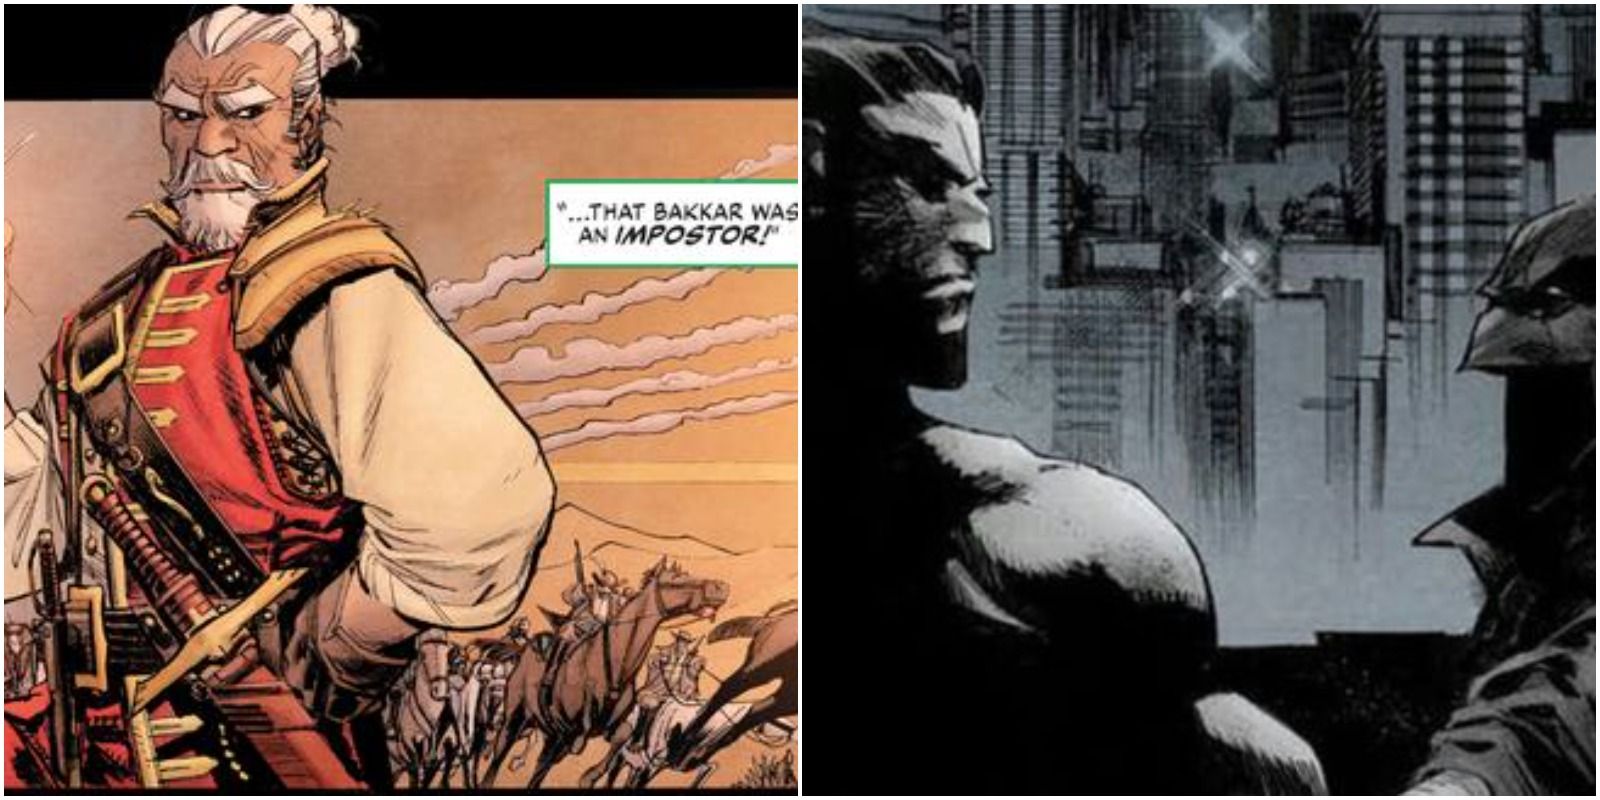 Bakkar in a flashback sequence during Curse of the White Knight and cover art for an issue of White Knight featuring Bruce Wayne